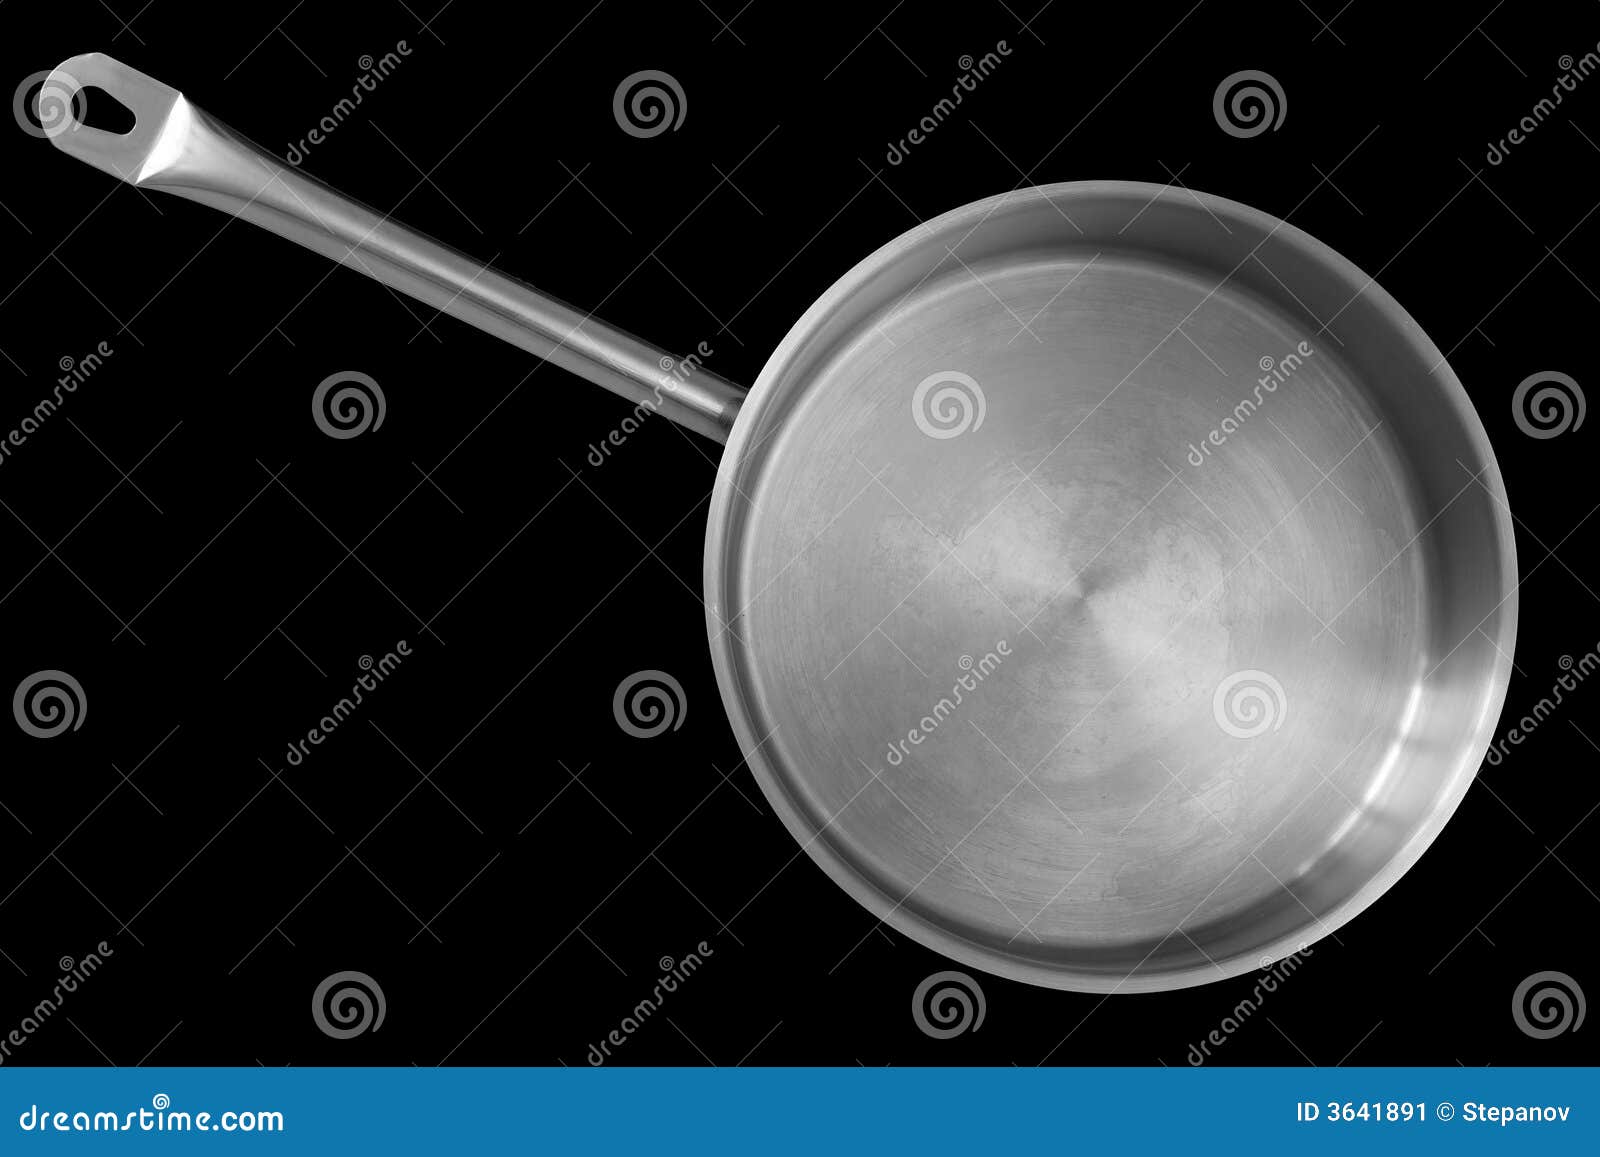 606 Big Frying Pan Hot Meal Stock Photos - Free & Royalty-Free Stock Photos  from Dreamstime